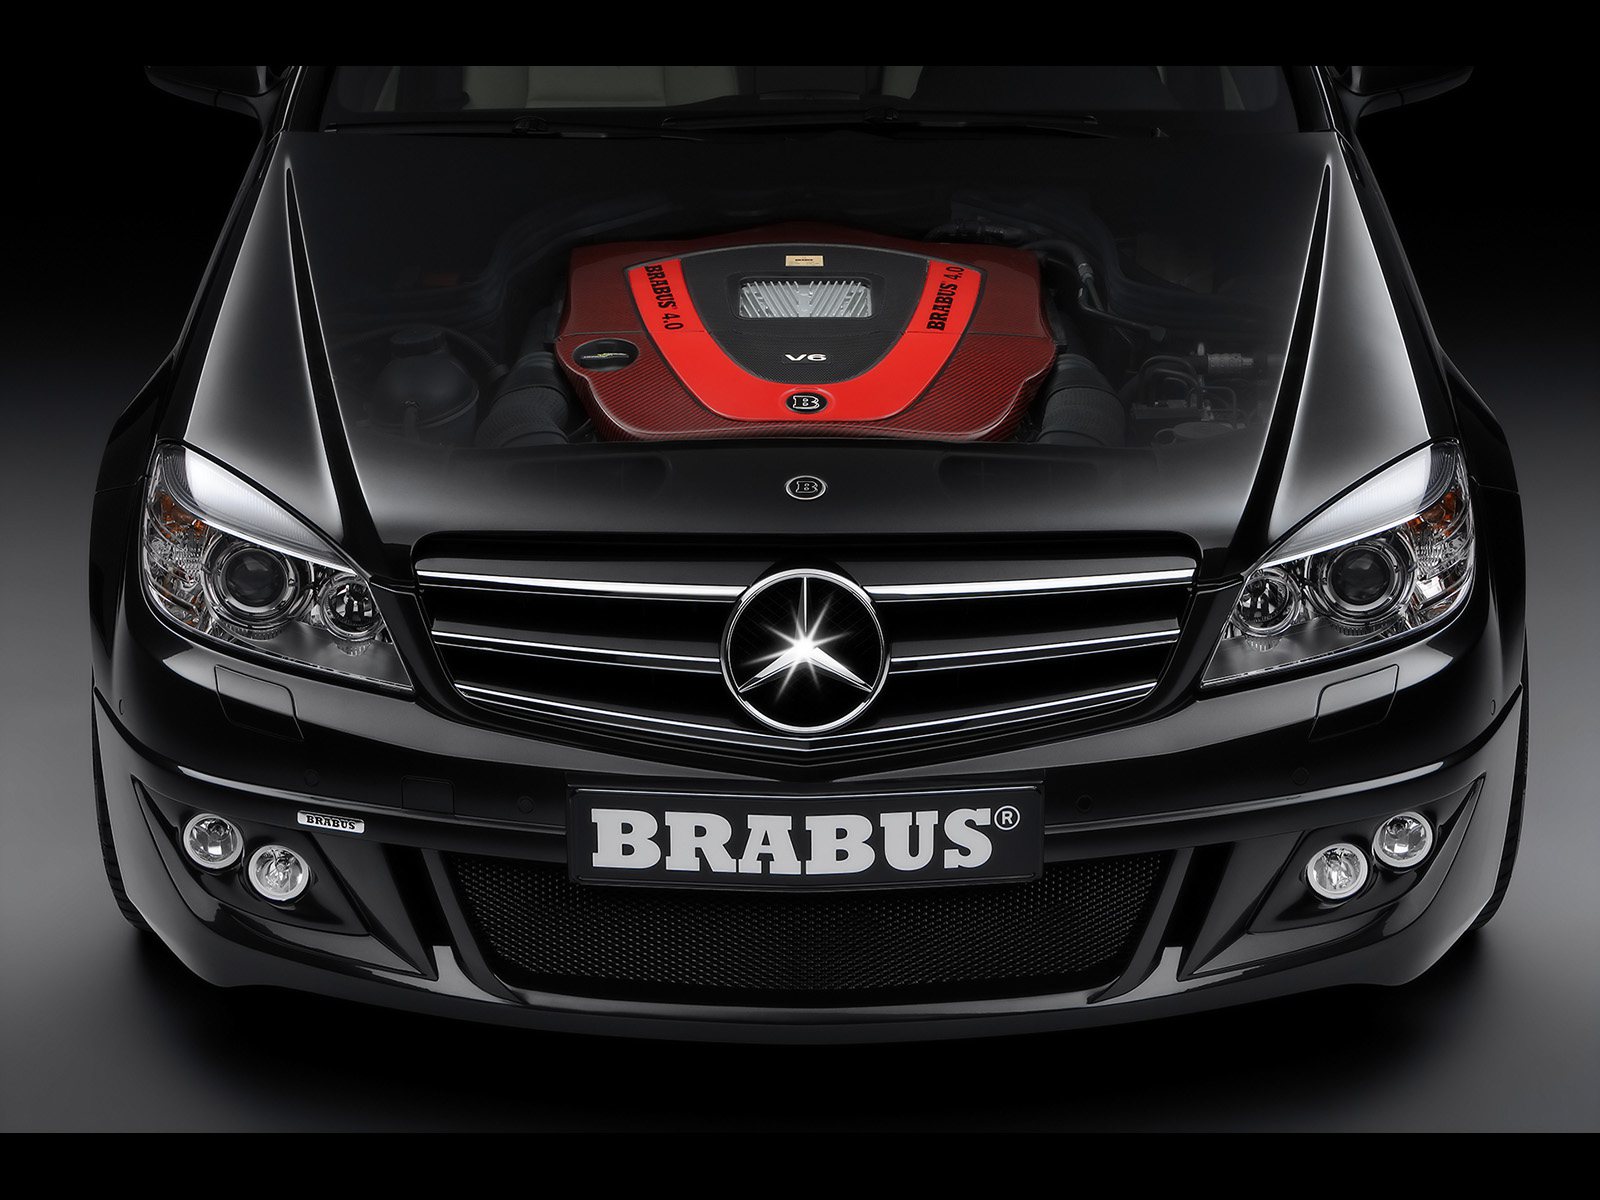 14478028442007-Brabus-Mercedes-Benz-Engine-Ghosted-1600x1200